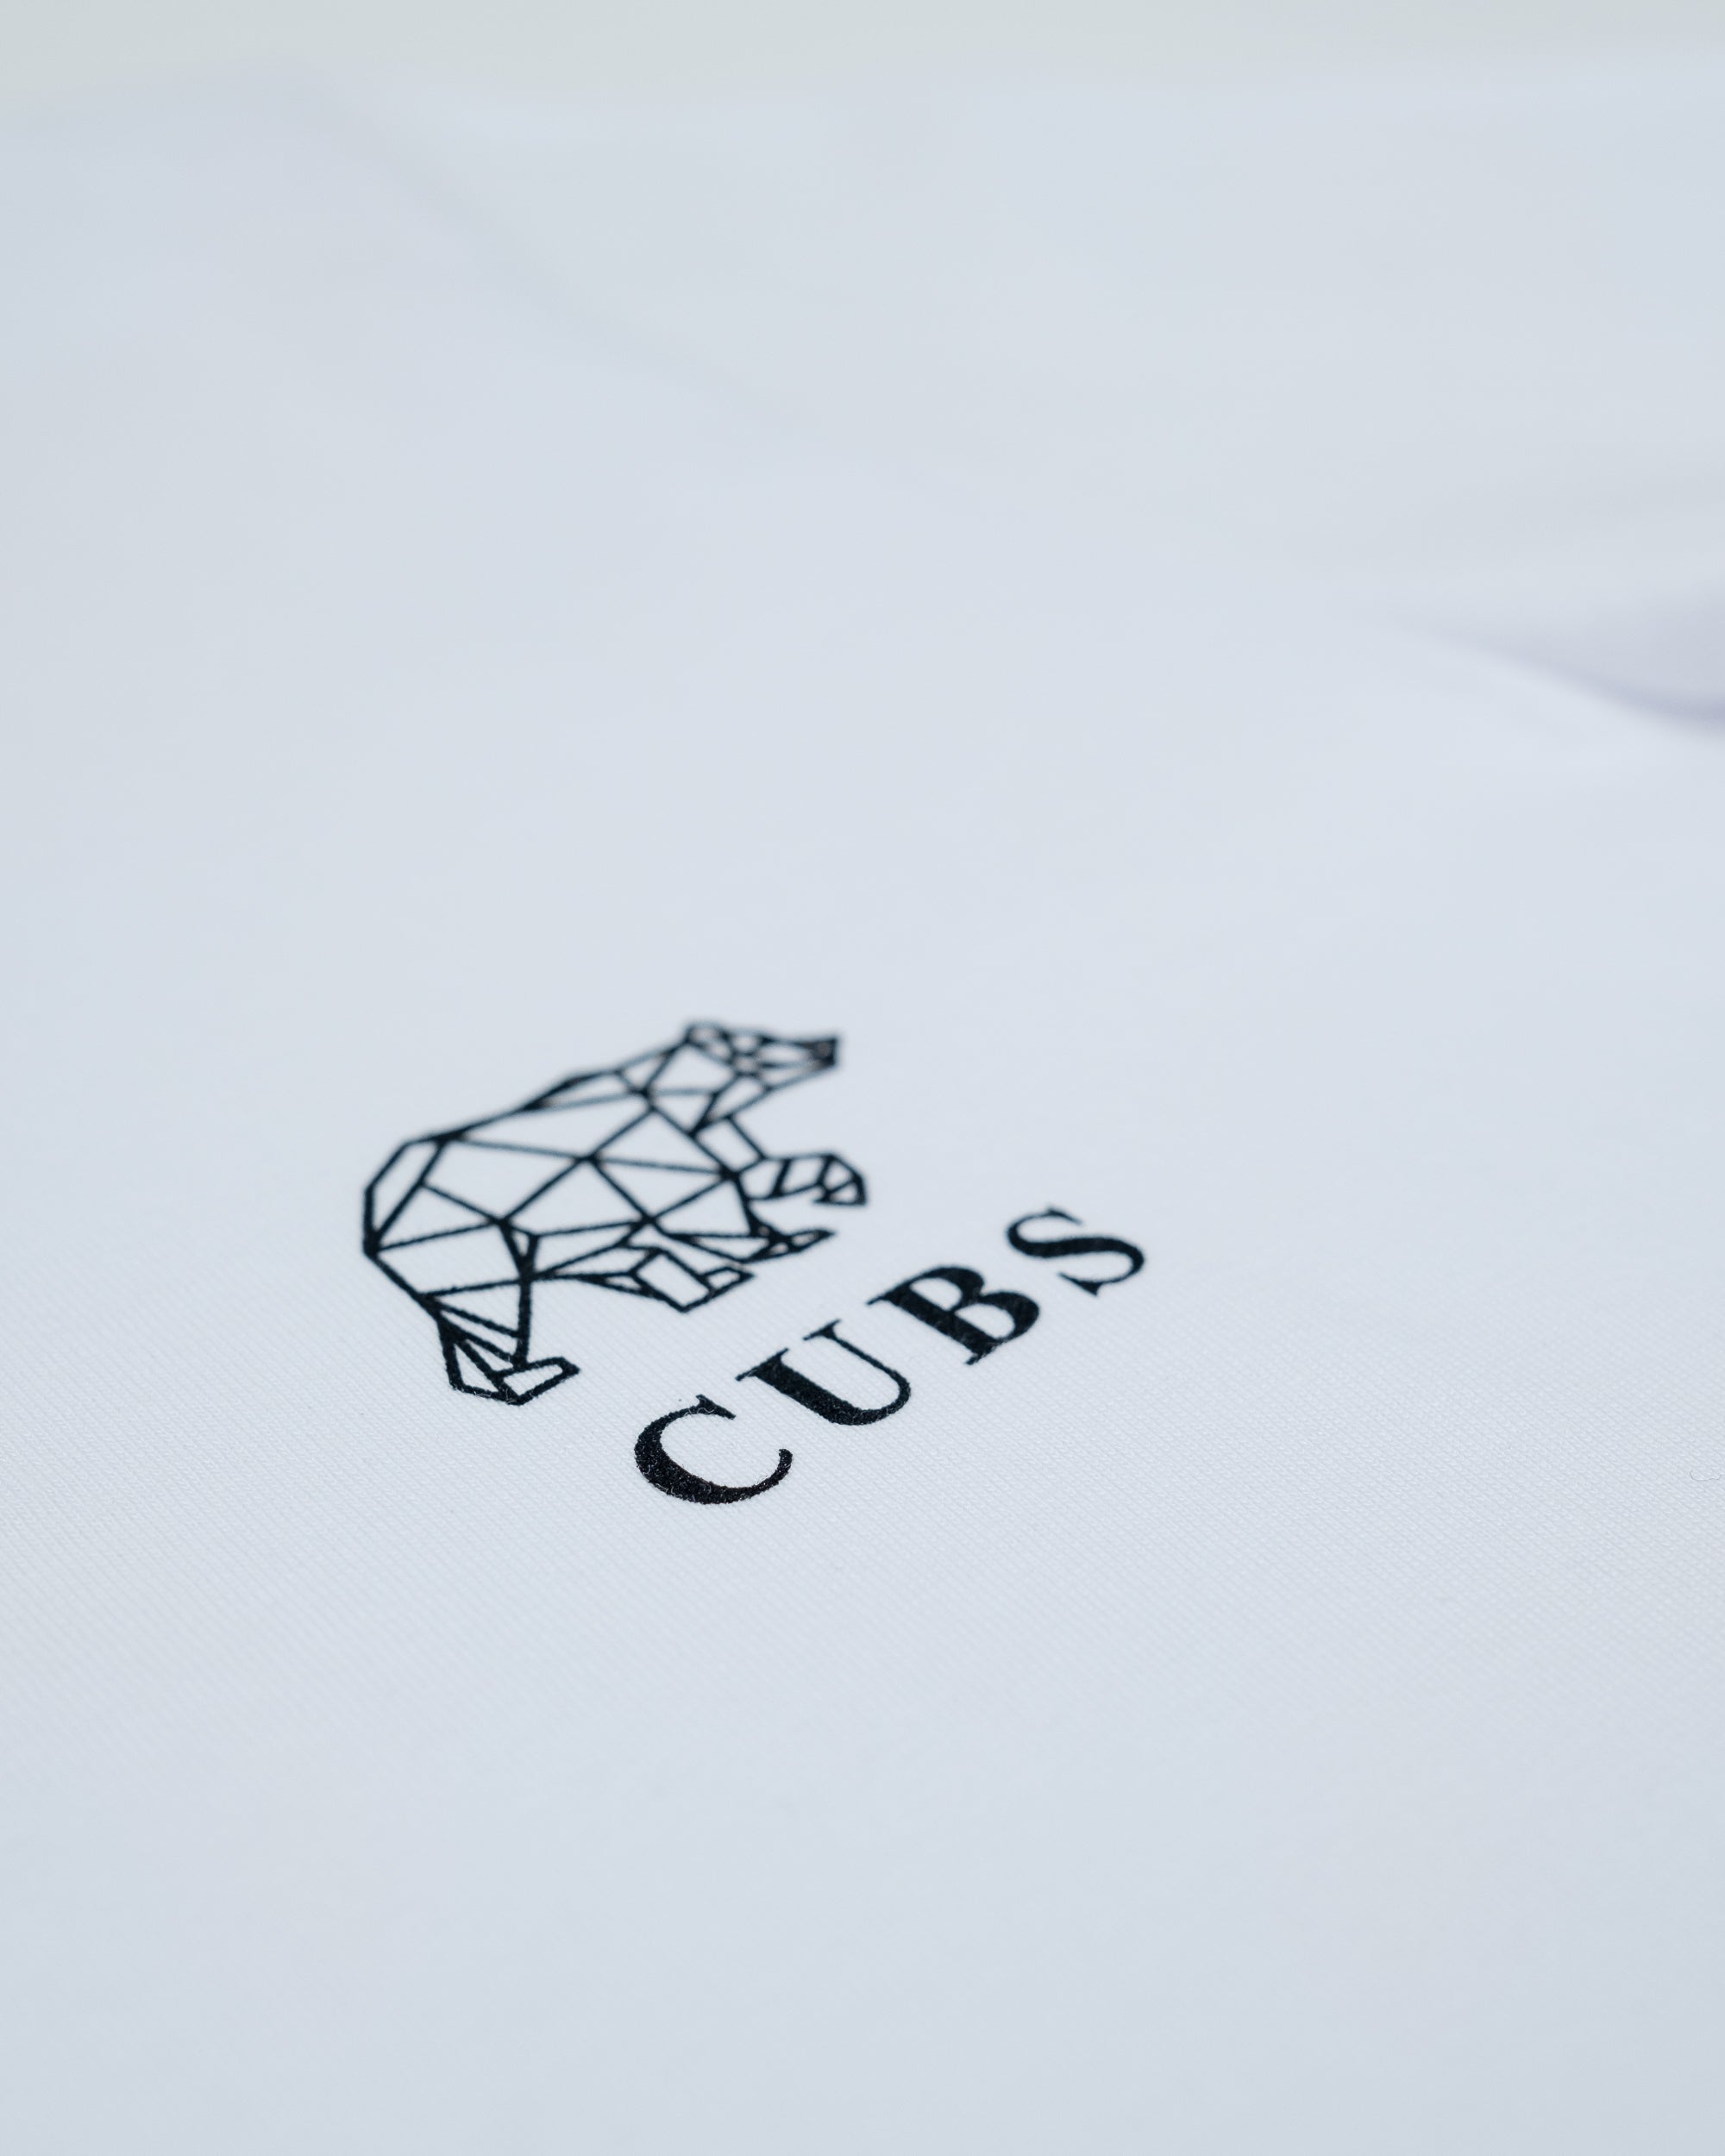 White Logo T-shirt by No1 Cubs featuring a simple and stylish design with the No1 Cubs logo on the chest. Made from premium, comfortable fabric, perfect for casual wear. Available in various sizes for all genders. Shop No1 Cubs for high-quality, branded casual clothing